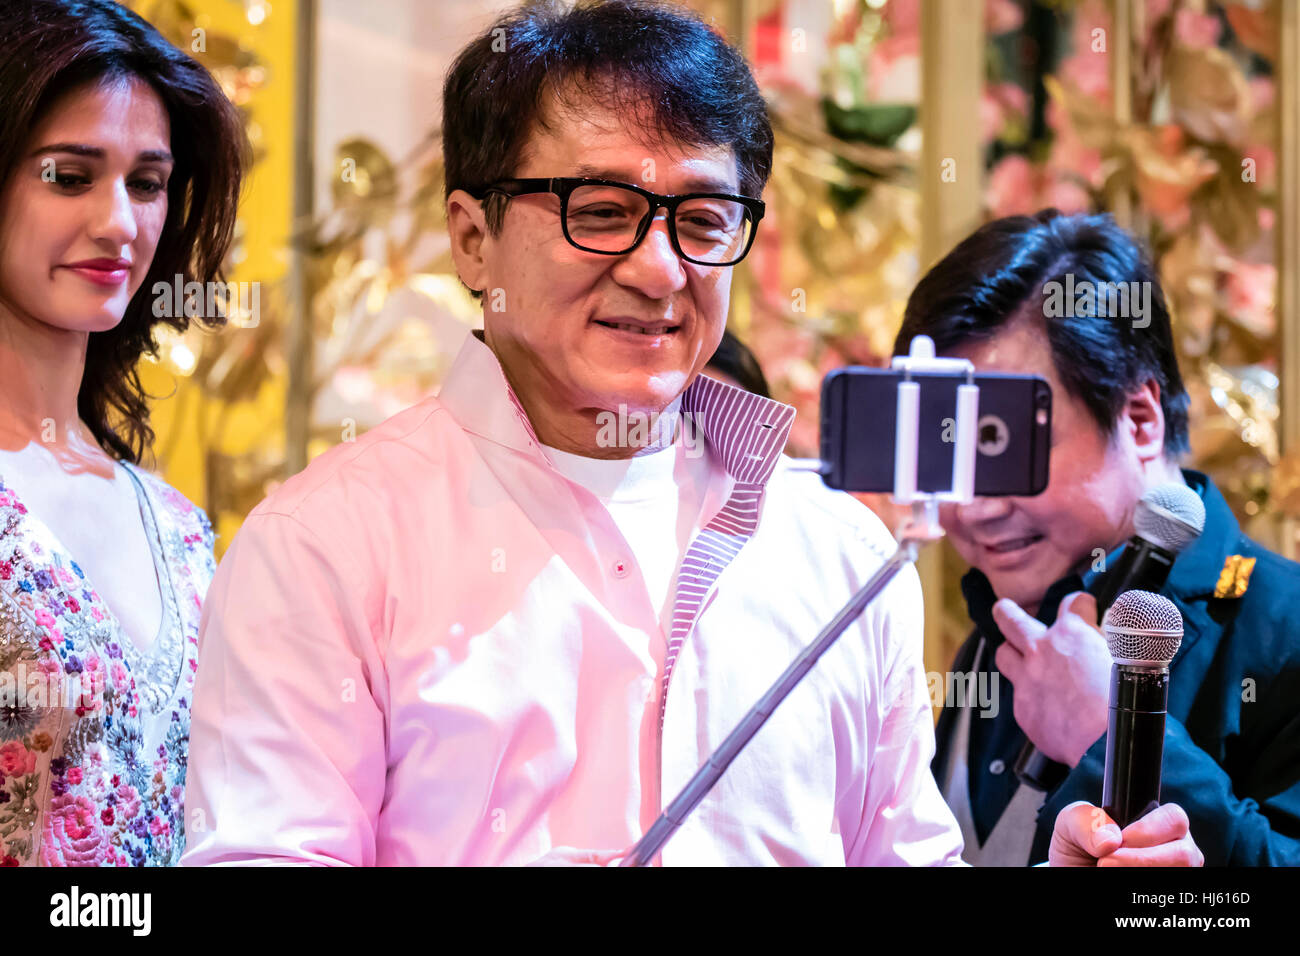 Kuala Lumpur, Malaysia. 21 Jan, 2017. Jackie Chan with Kung Fu Yoga director and casts in Kuala Lumpur movie promotion tour. Jackie taking selfie with everyone. © Danny Chan/Alamy Live News. Stock Photo